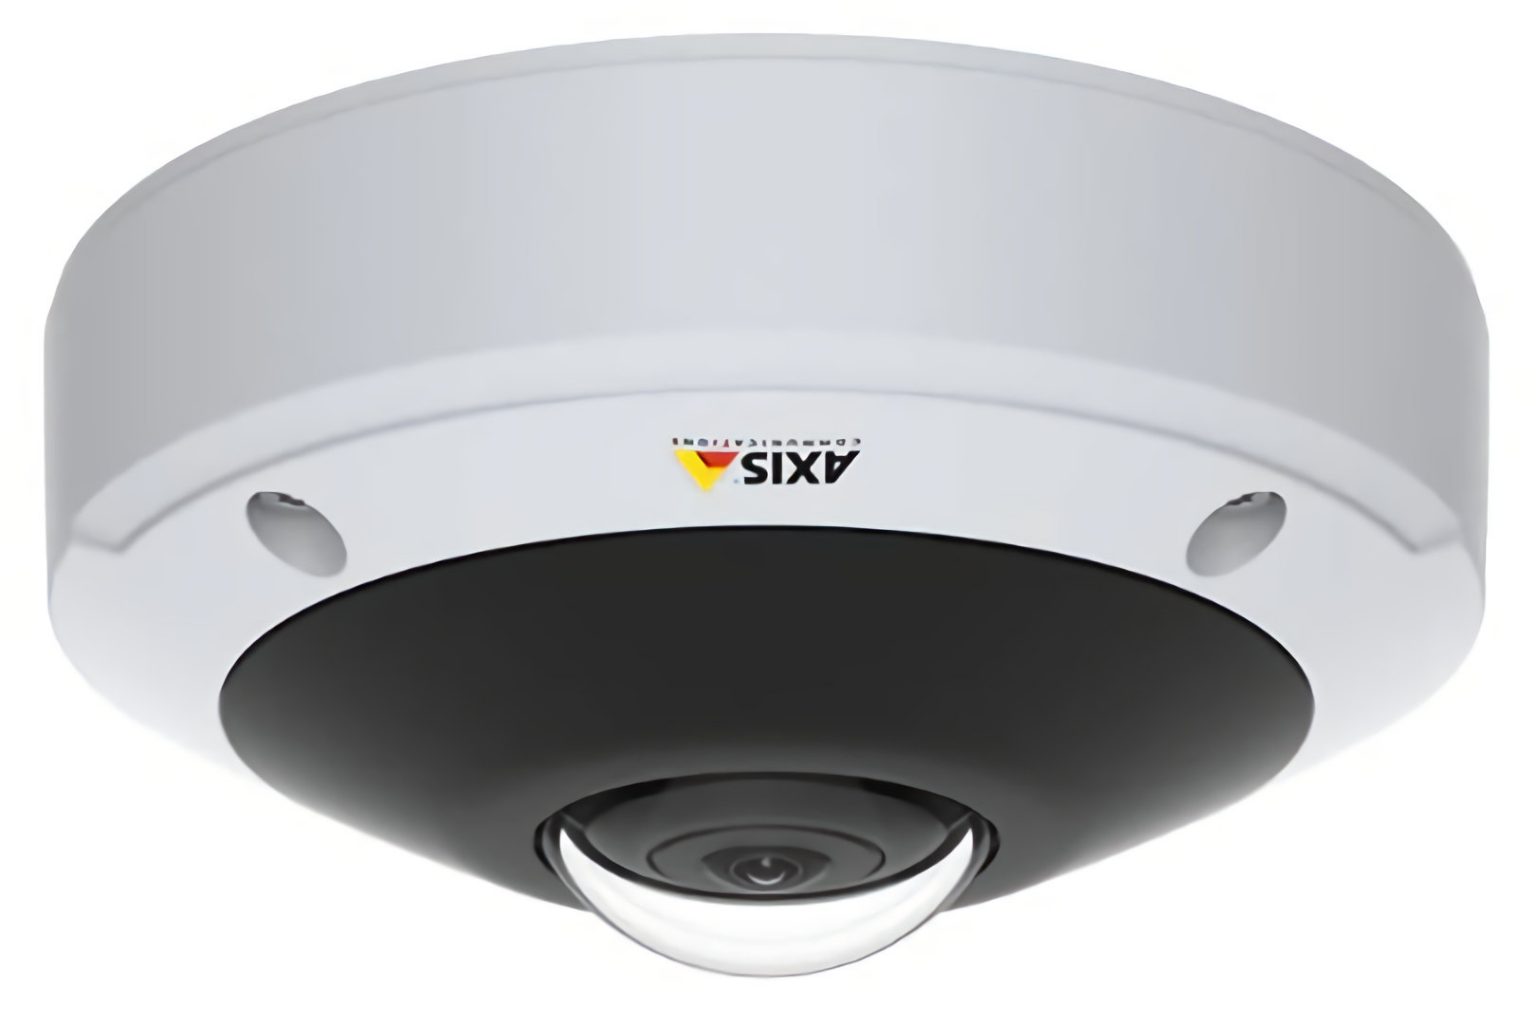 microngroup axis M3058 dome network camera